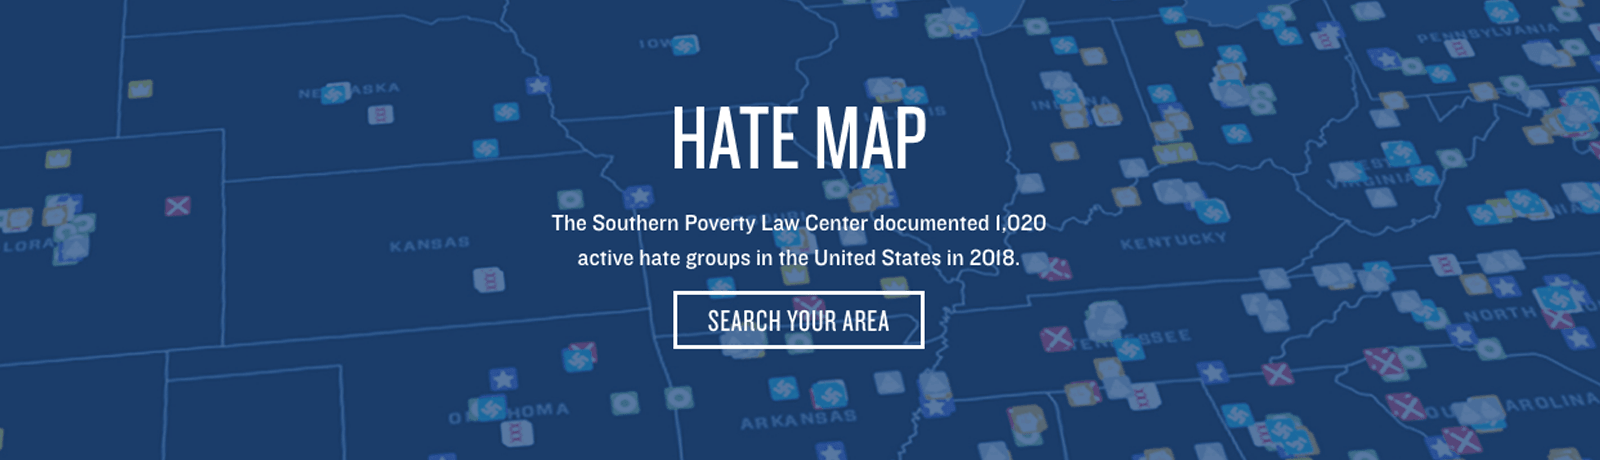 The Southern Poverty Law Center creates a sense of urgency with its CTA body copy and button prompt wording